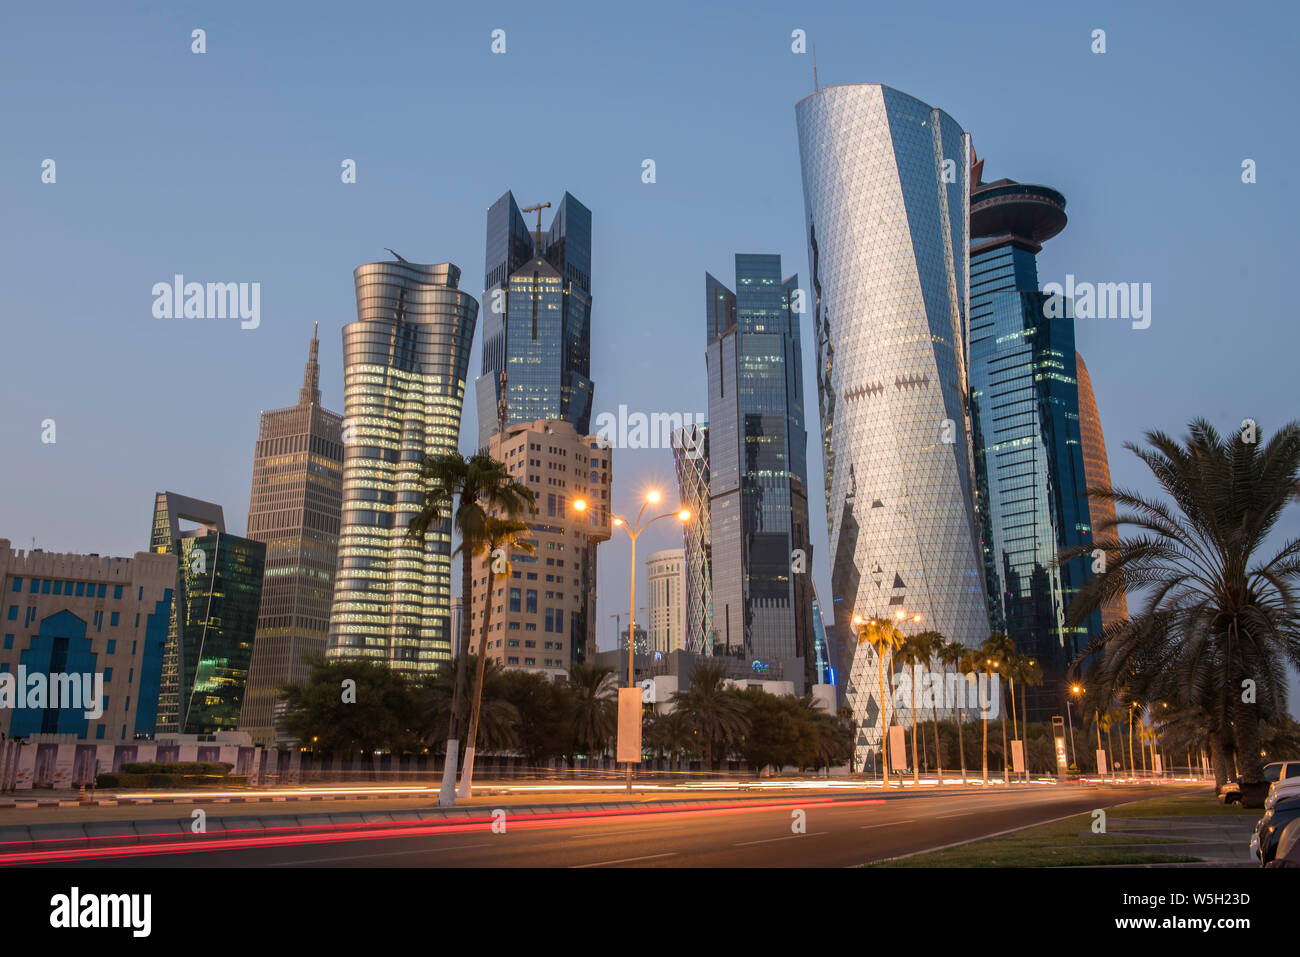 The skyline of the modern and high-rising city of Doha in Qatar, Middle East. - Doha's Corniche in West Bay, Doha, Qatar Stock Photo